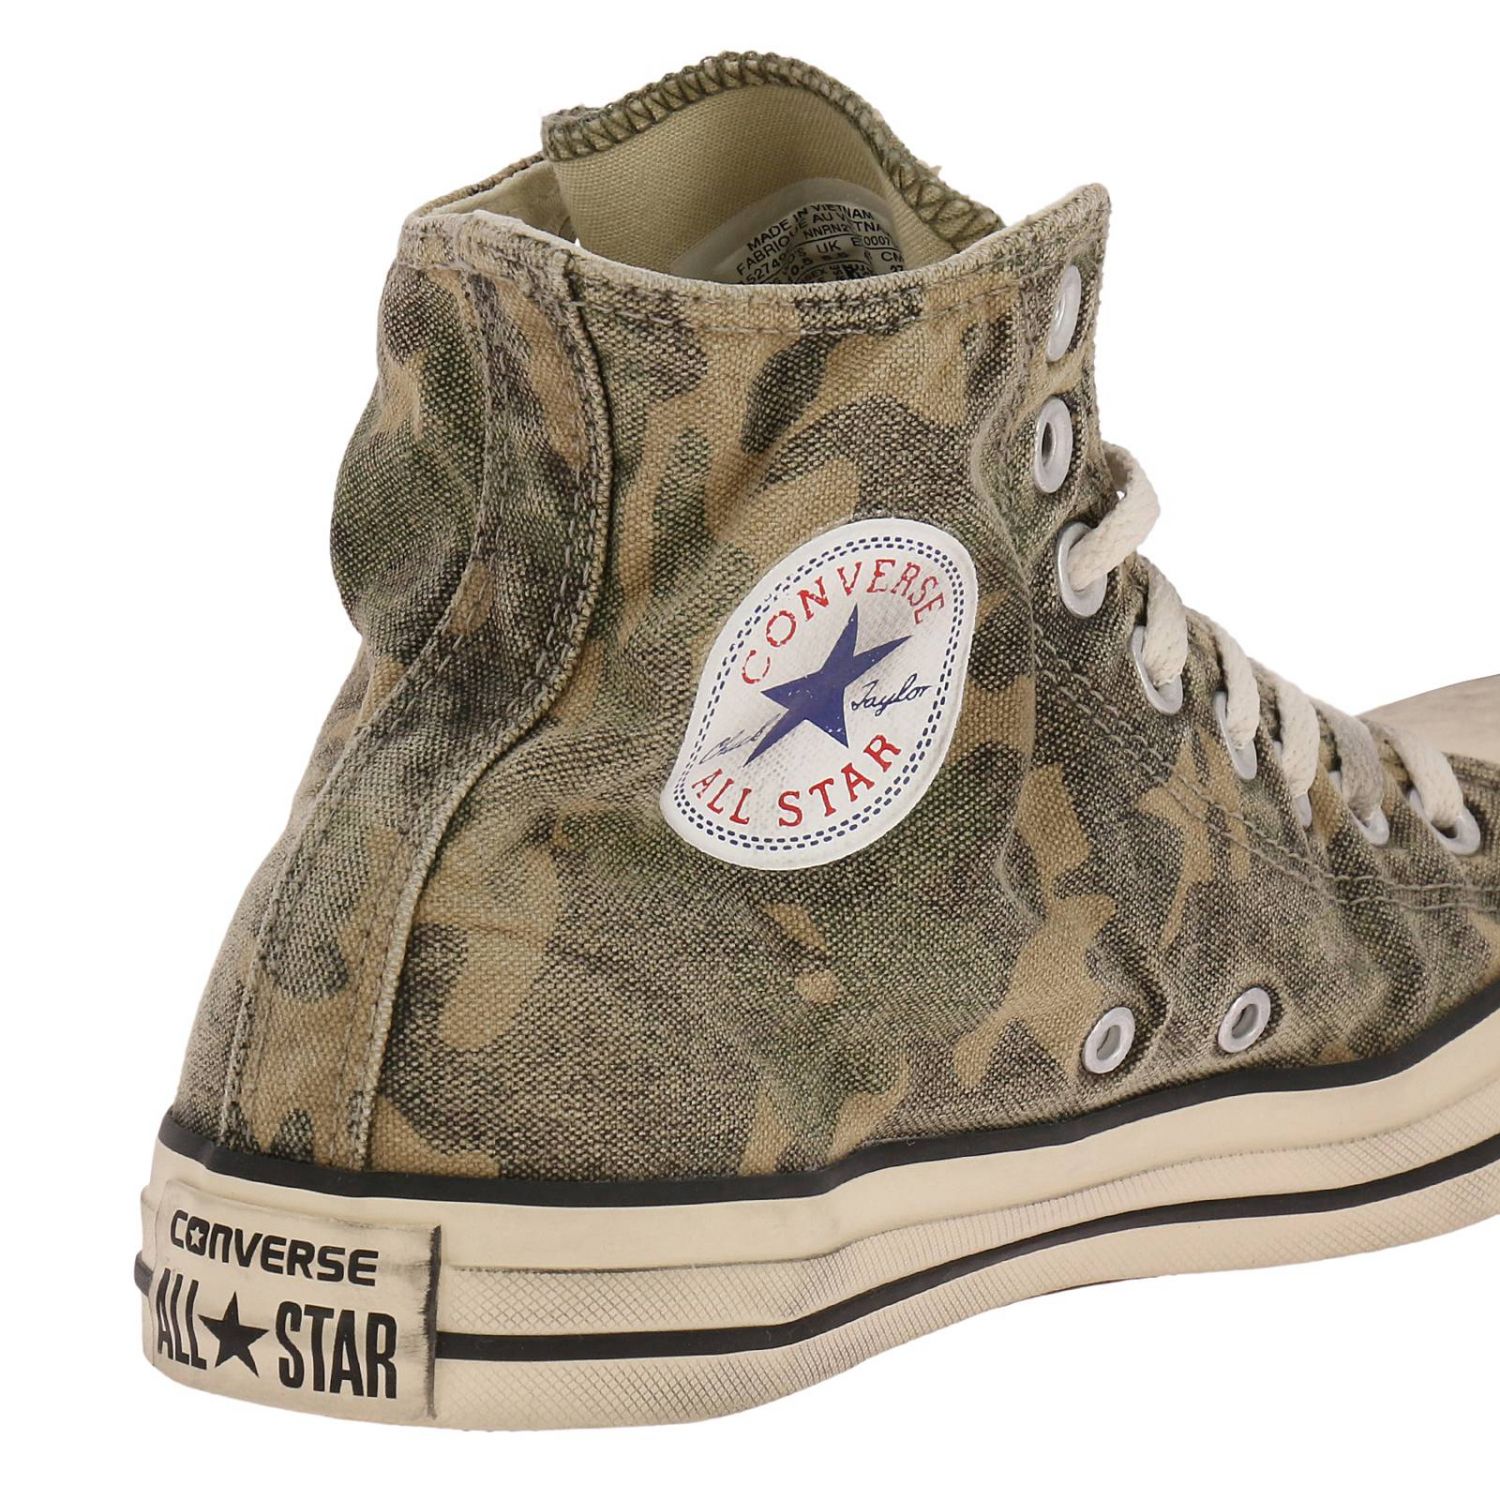 converse all star limited edition uk